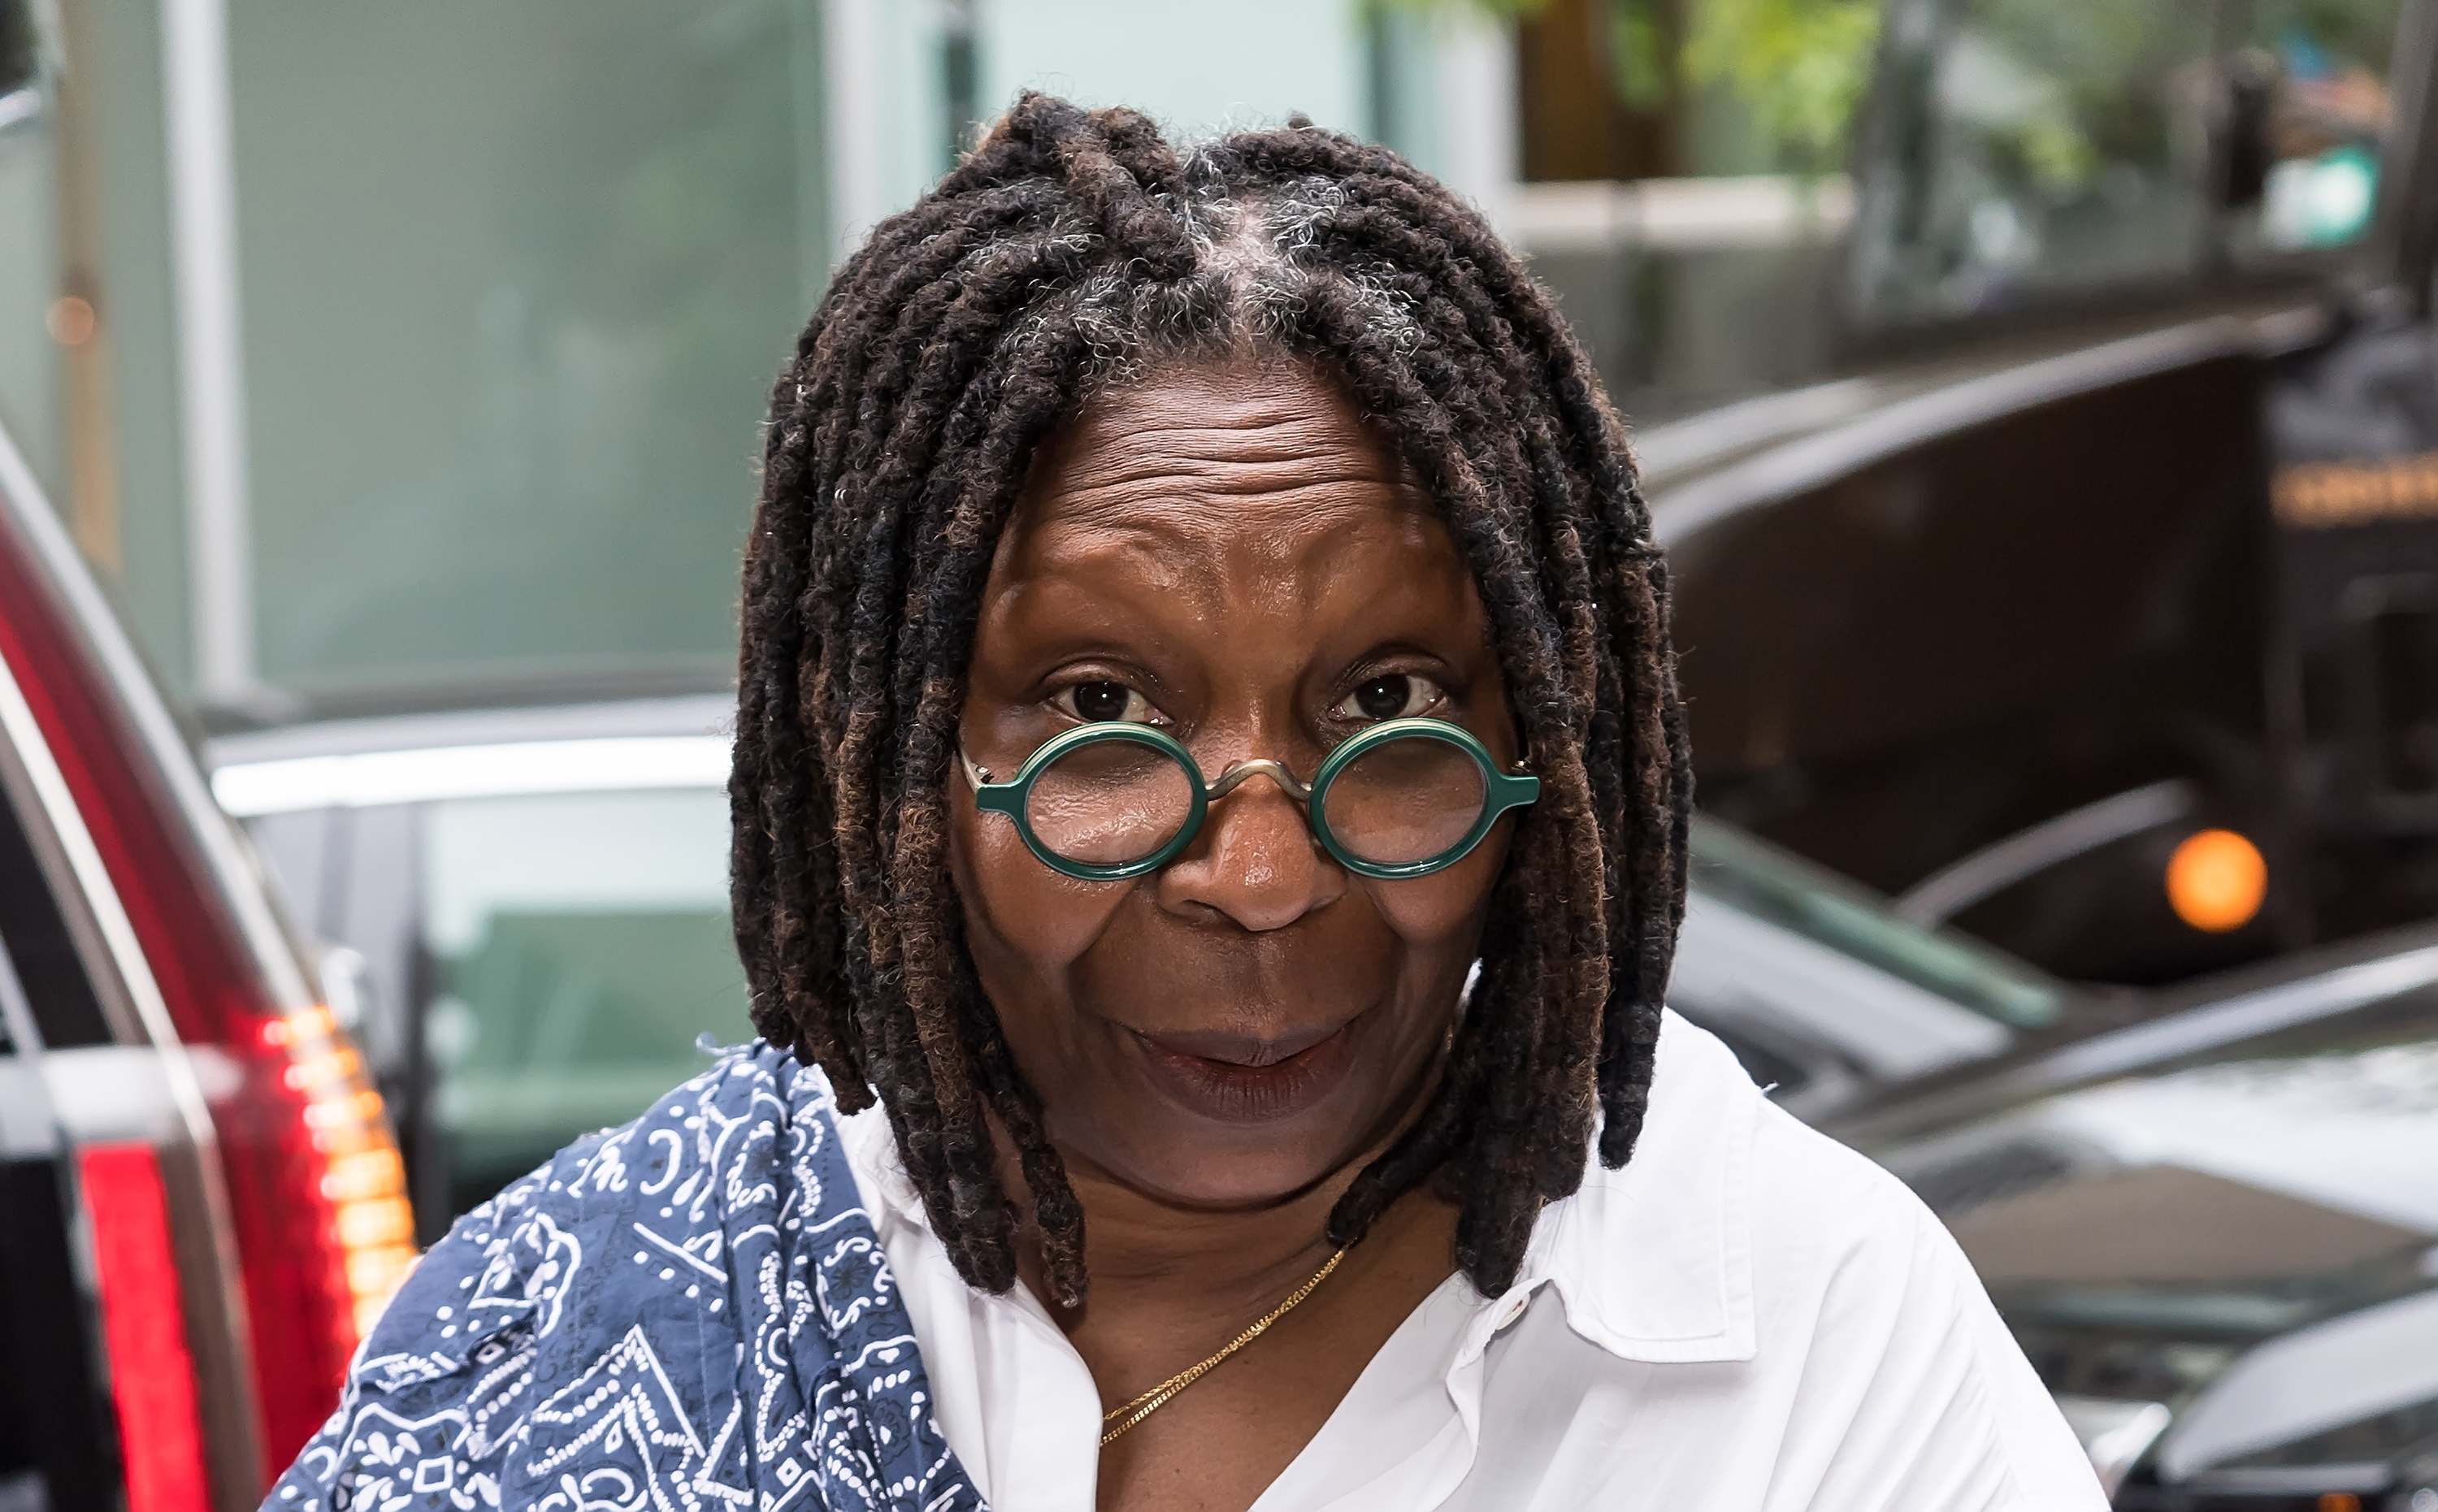 Whoopi Goldberg on September 7, 2018 | Source: Getty Images